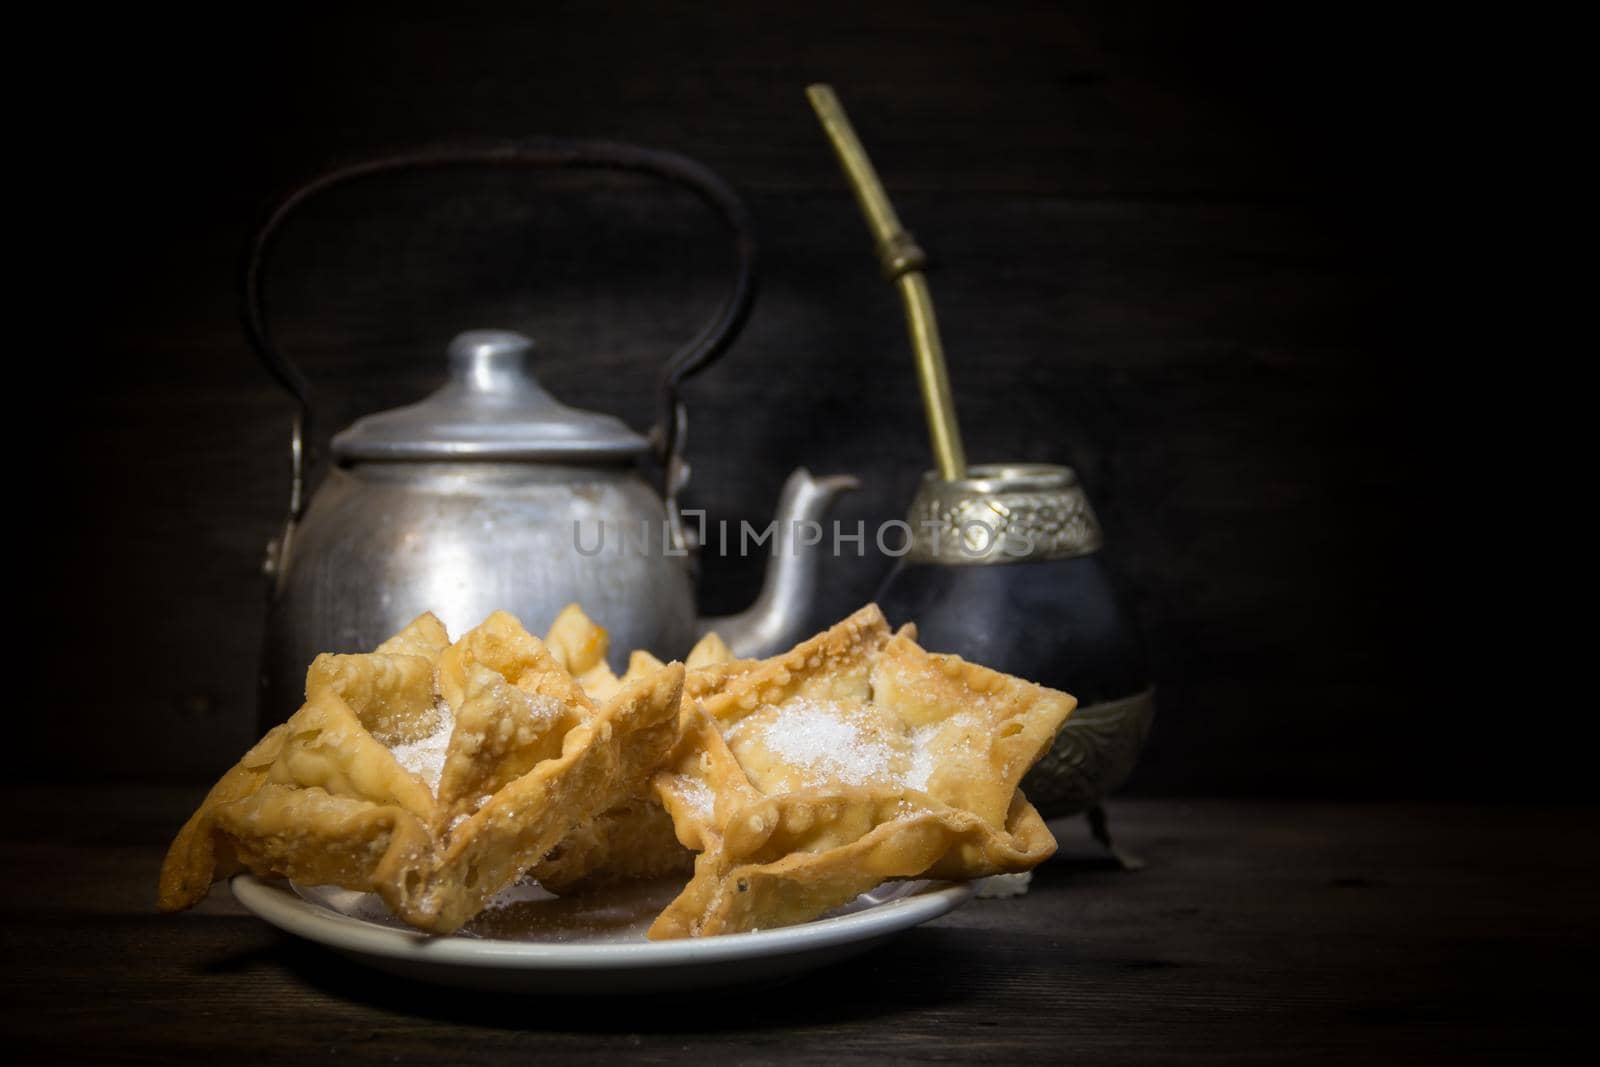 Plate of fried quince and sweet potato pastries with mate.Gastrnomia Argentina by GabrielaBertolini